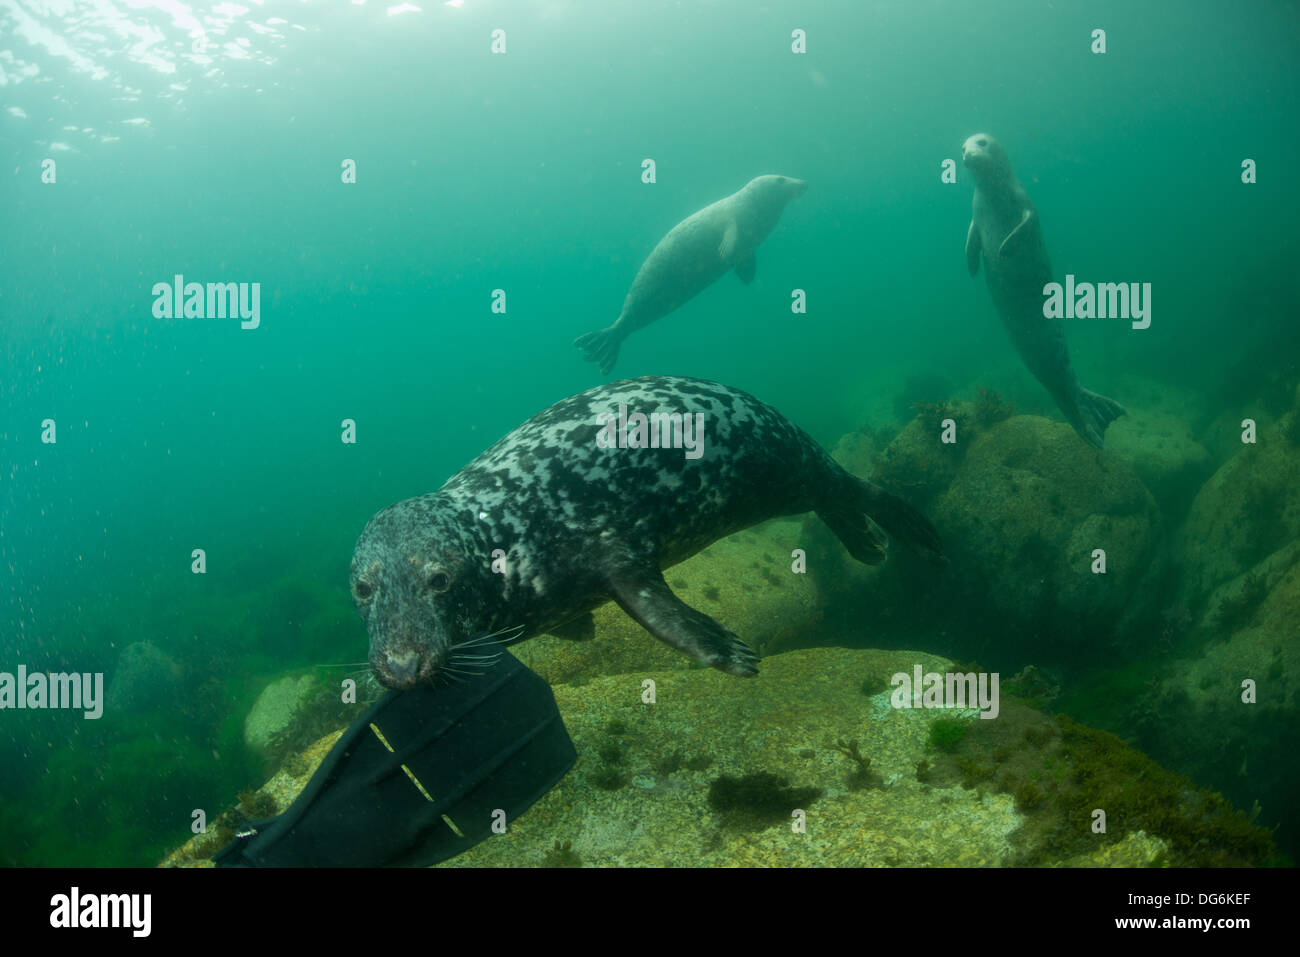 Grey seal plays with a divers fin. Stock Photo